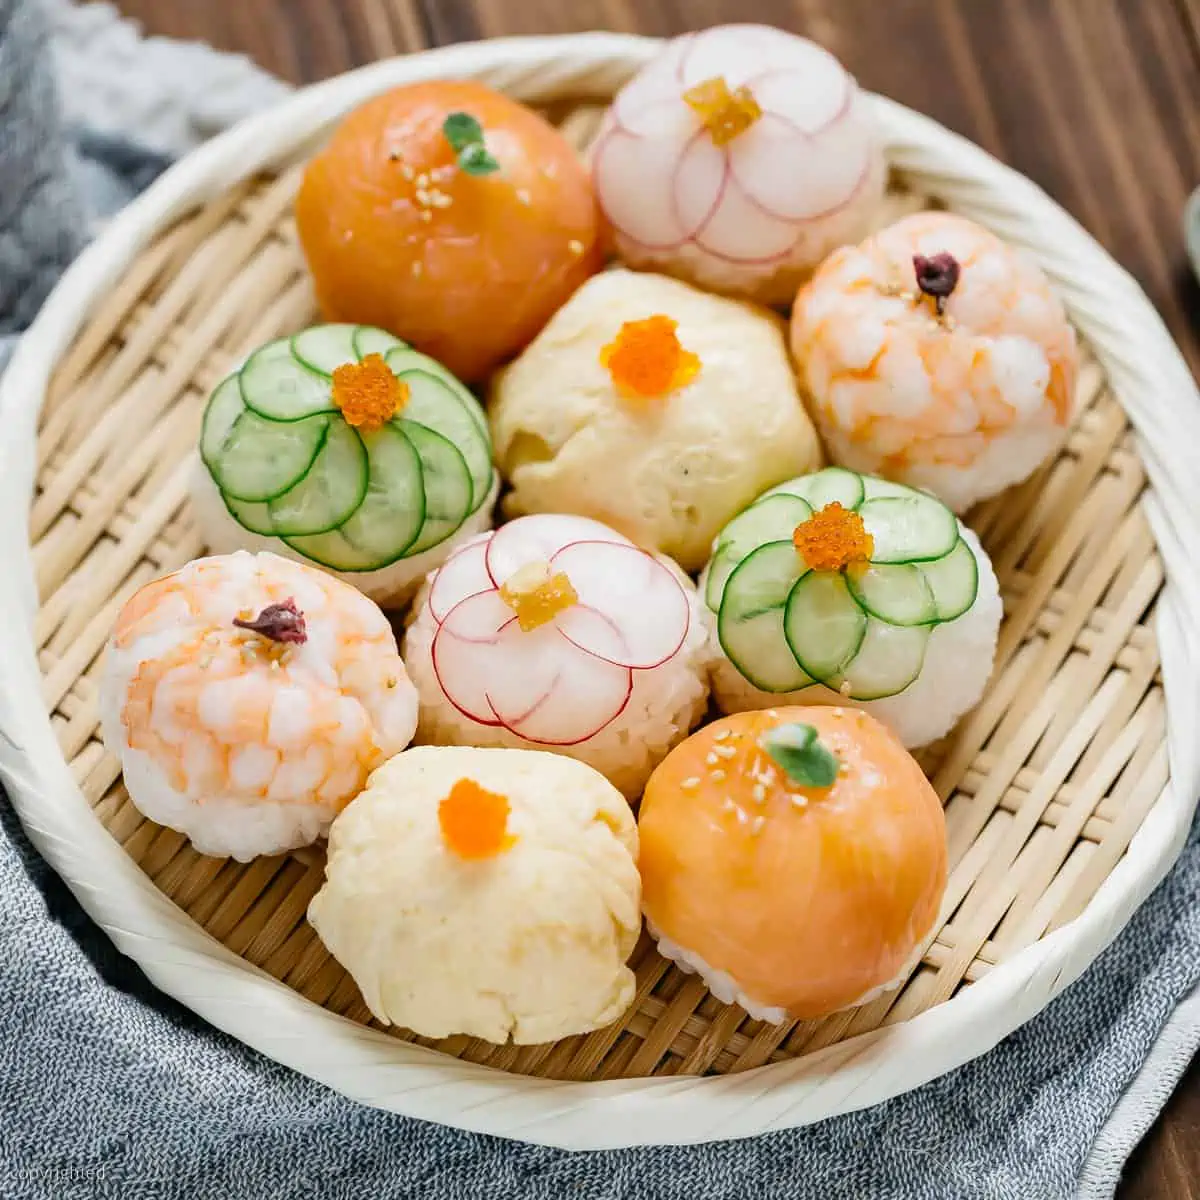 10 temari sushi balls are served on a round bamboo tray